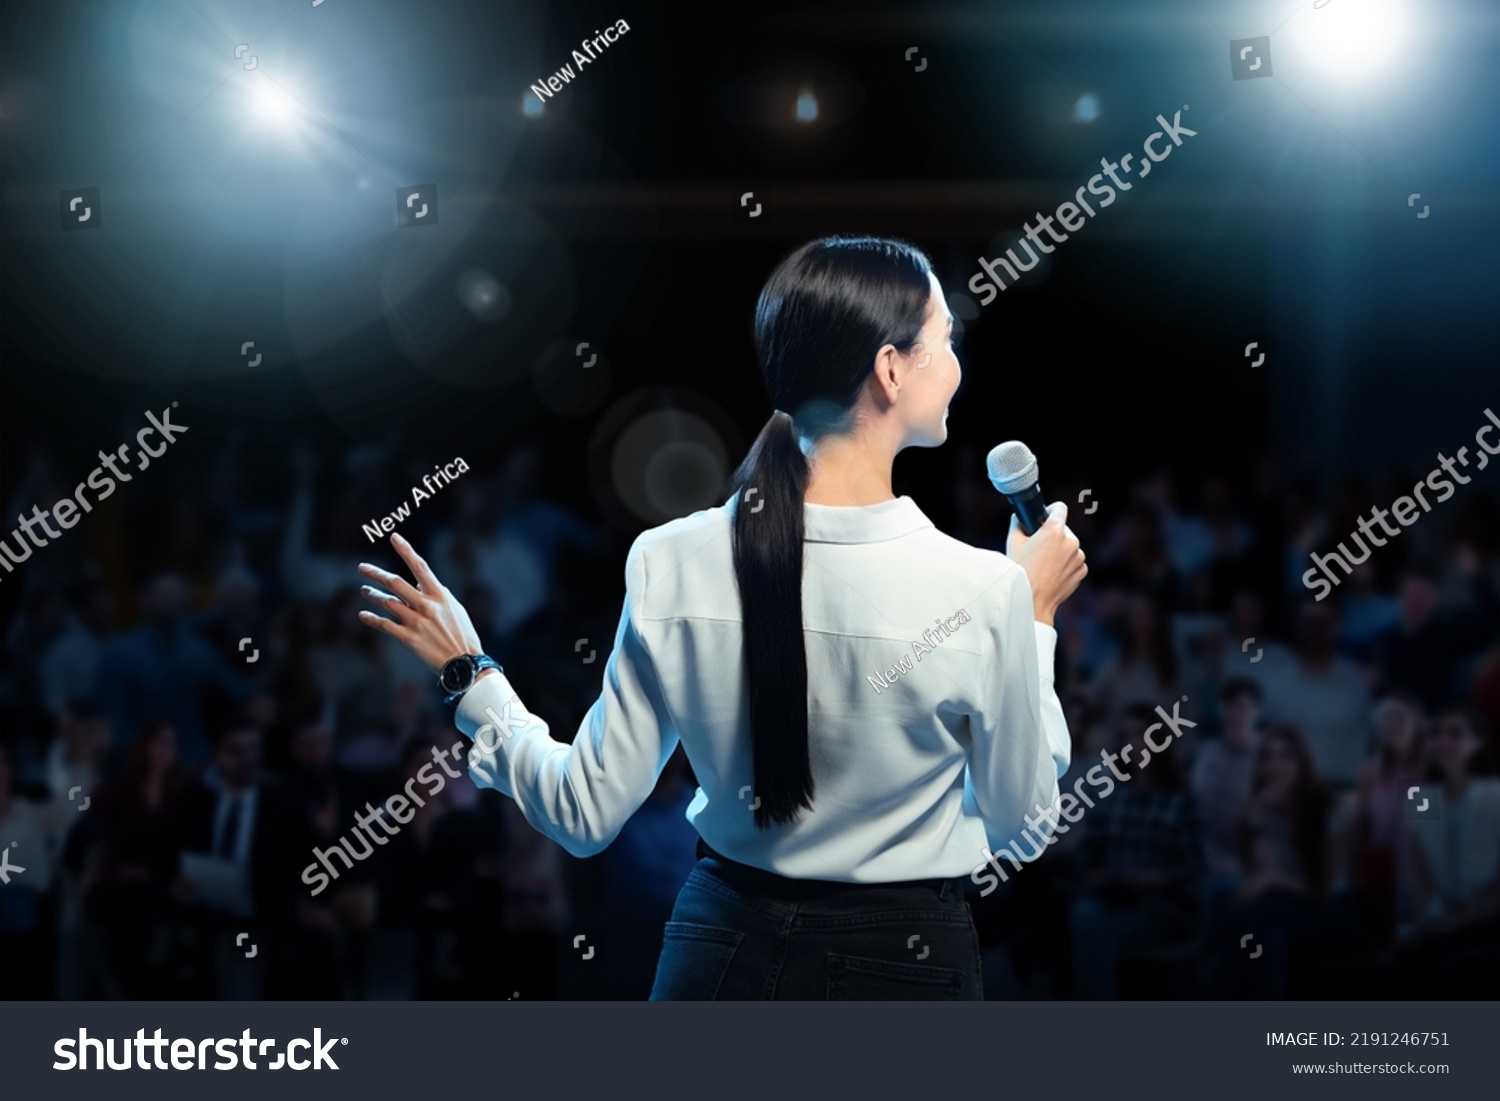 Motivational speaker with microphone performing on stage, back view #2191246751